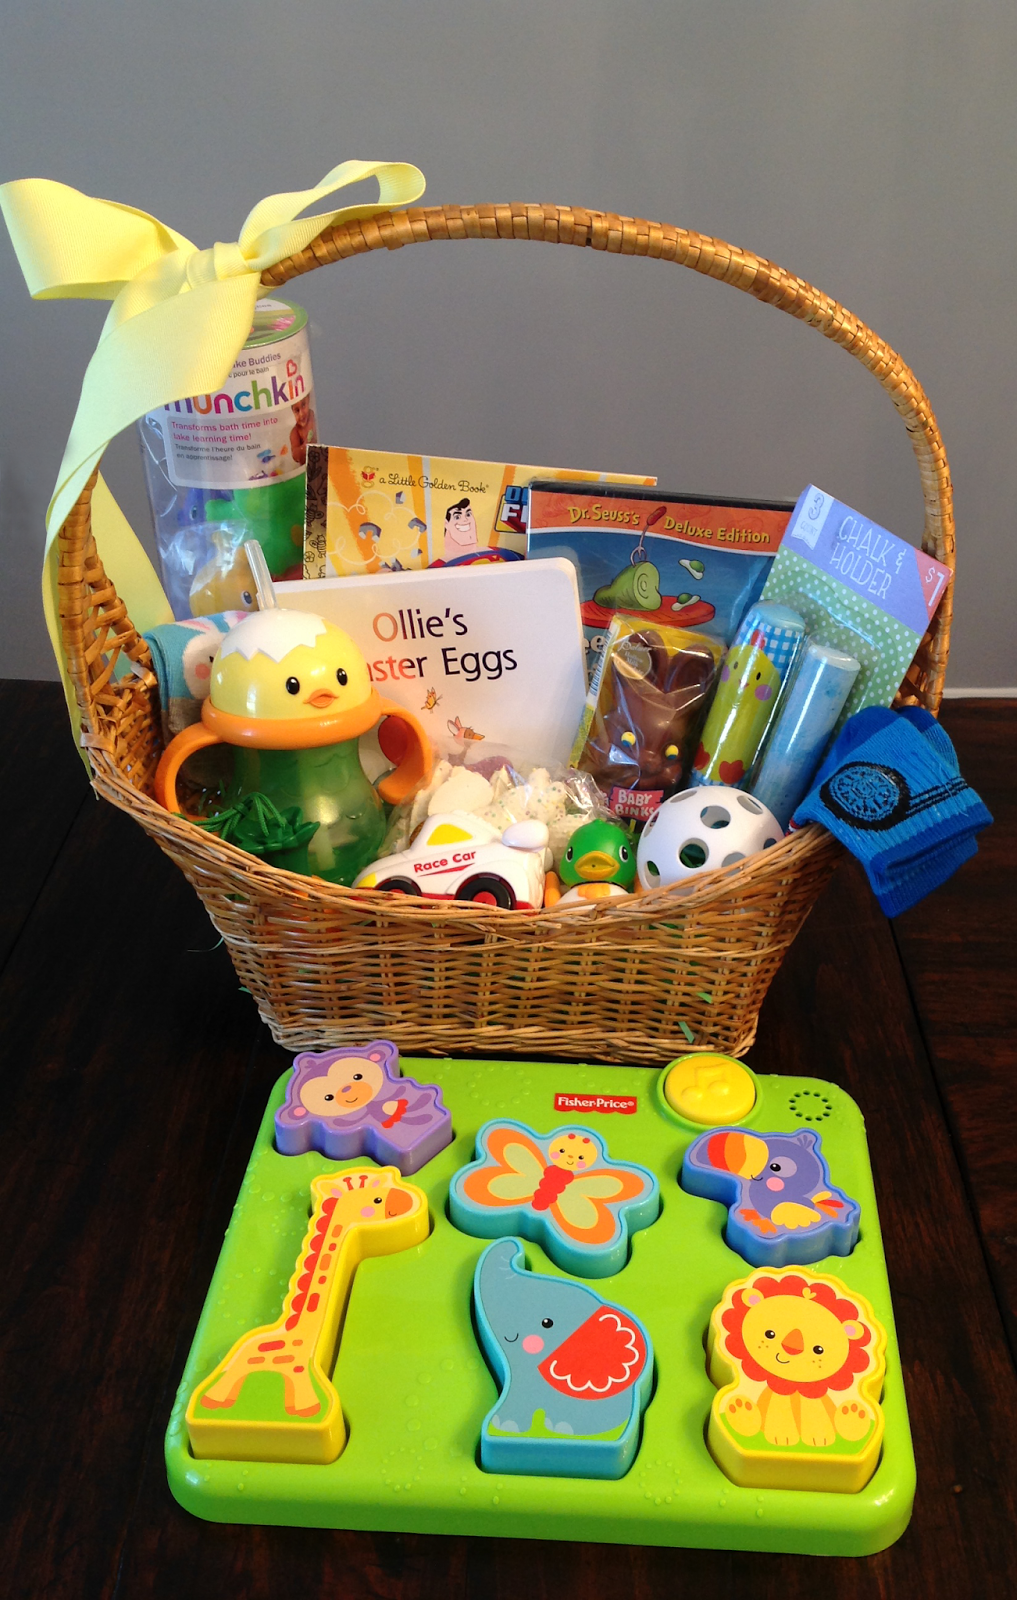 Hand Me Down Mom Genes 95 Easter Basket Ideas for Babies & Toddlers